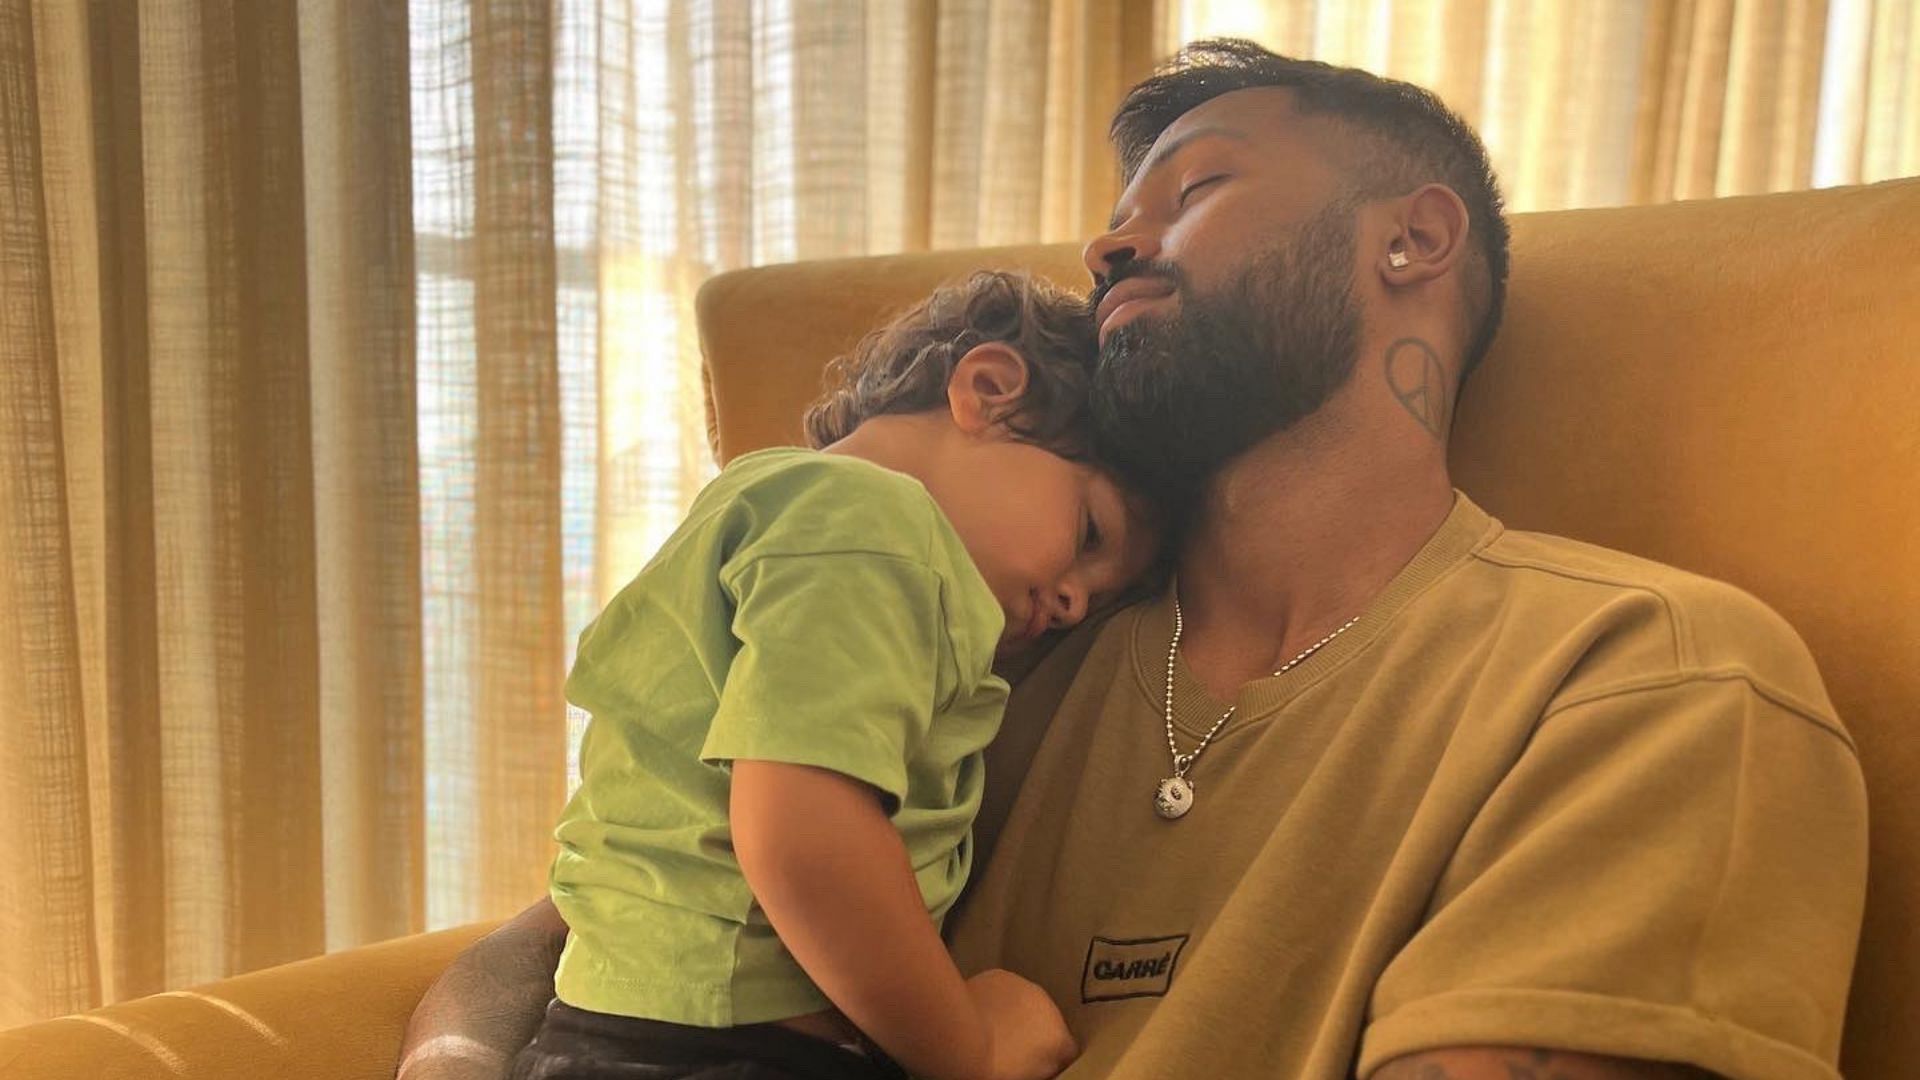 Hardik Pandya shared pictures with his son on social media